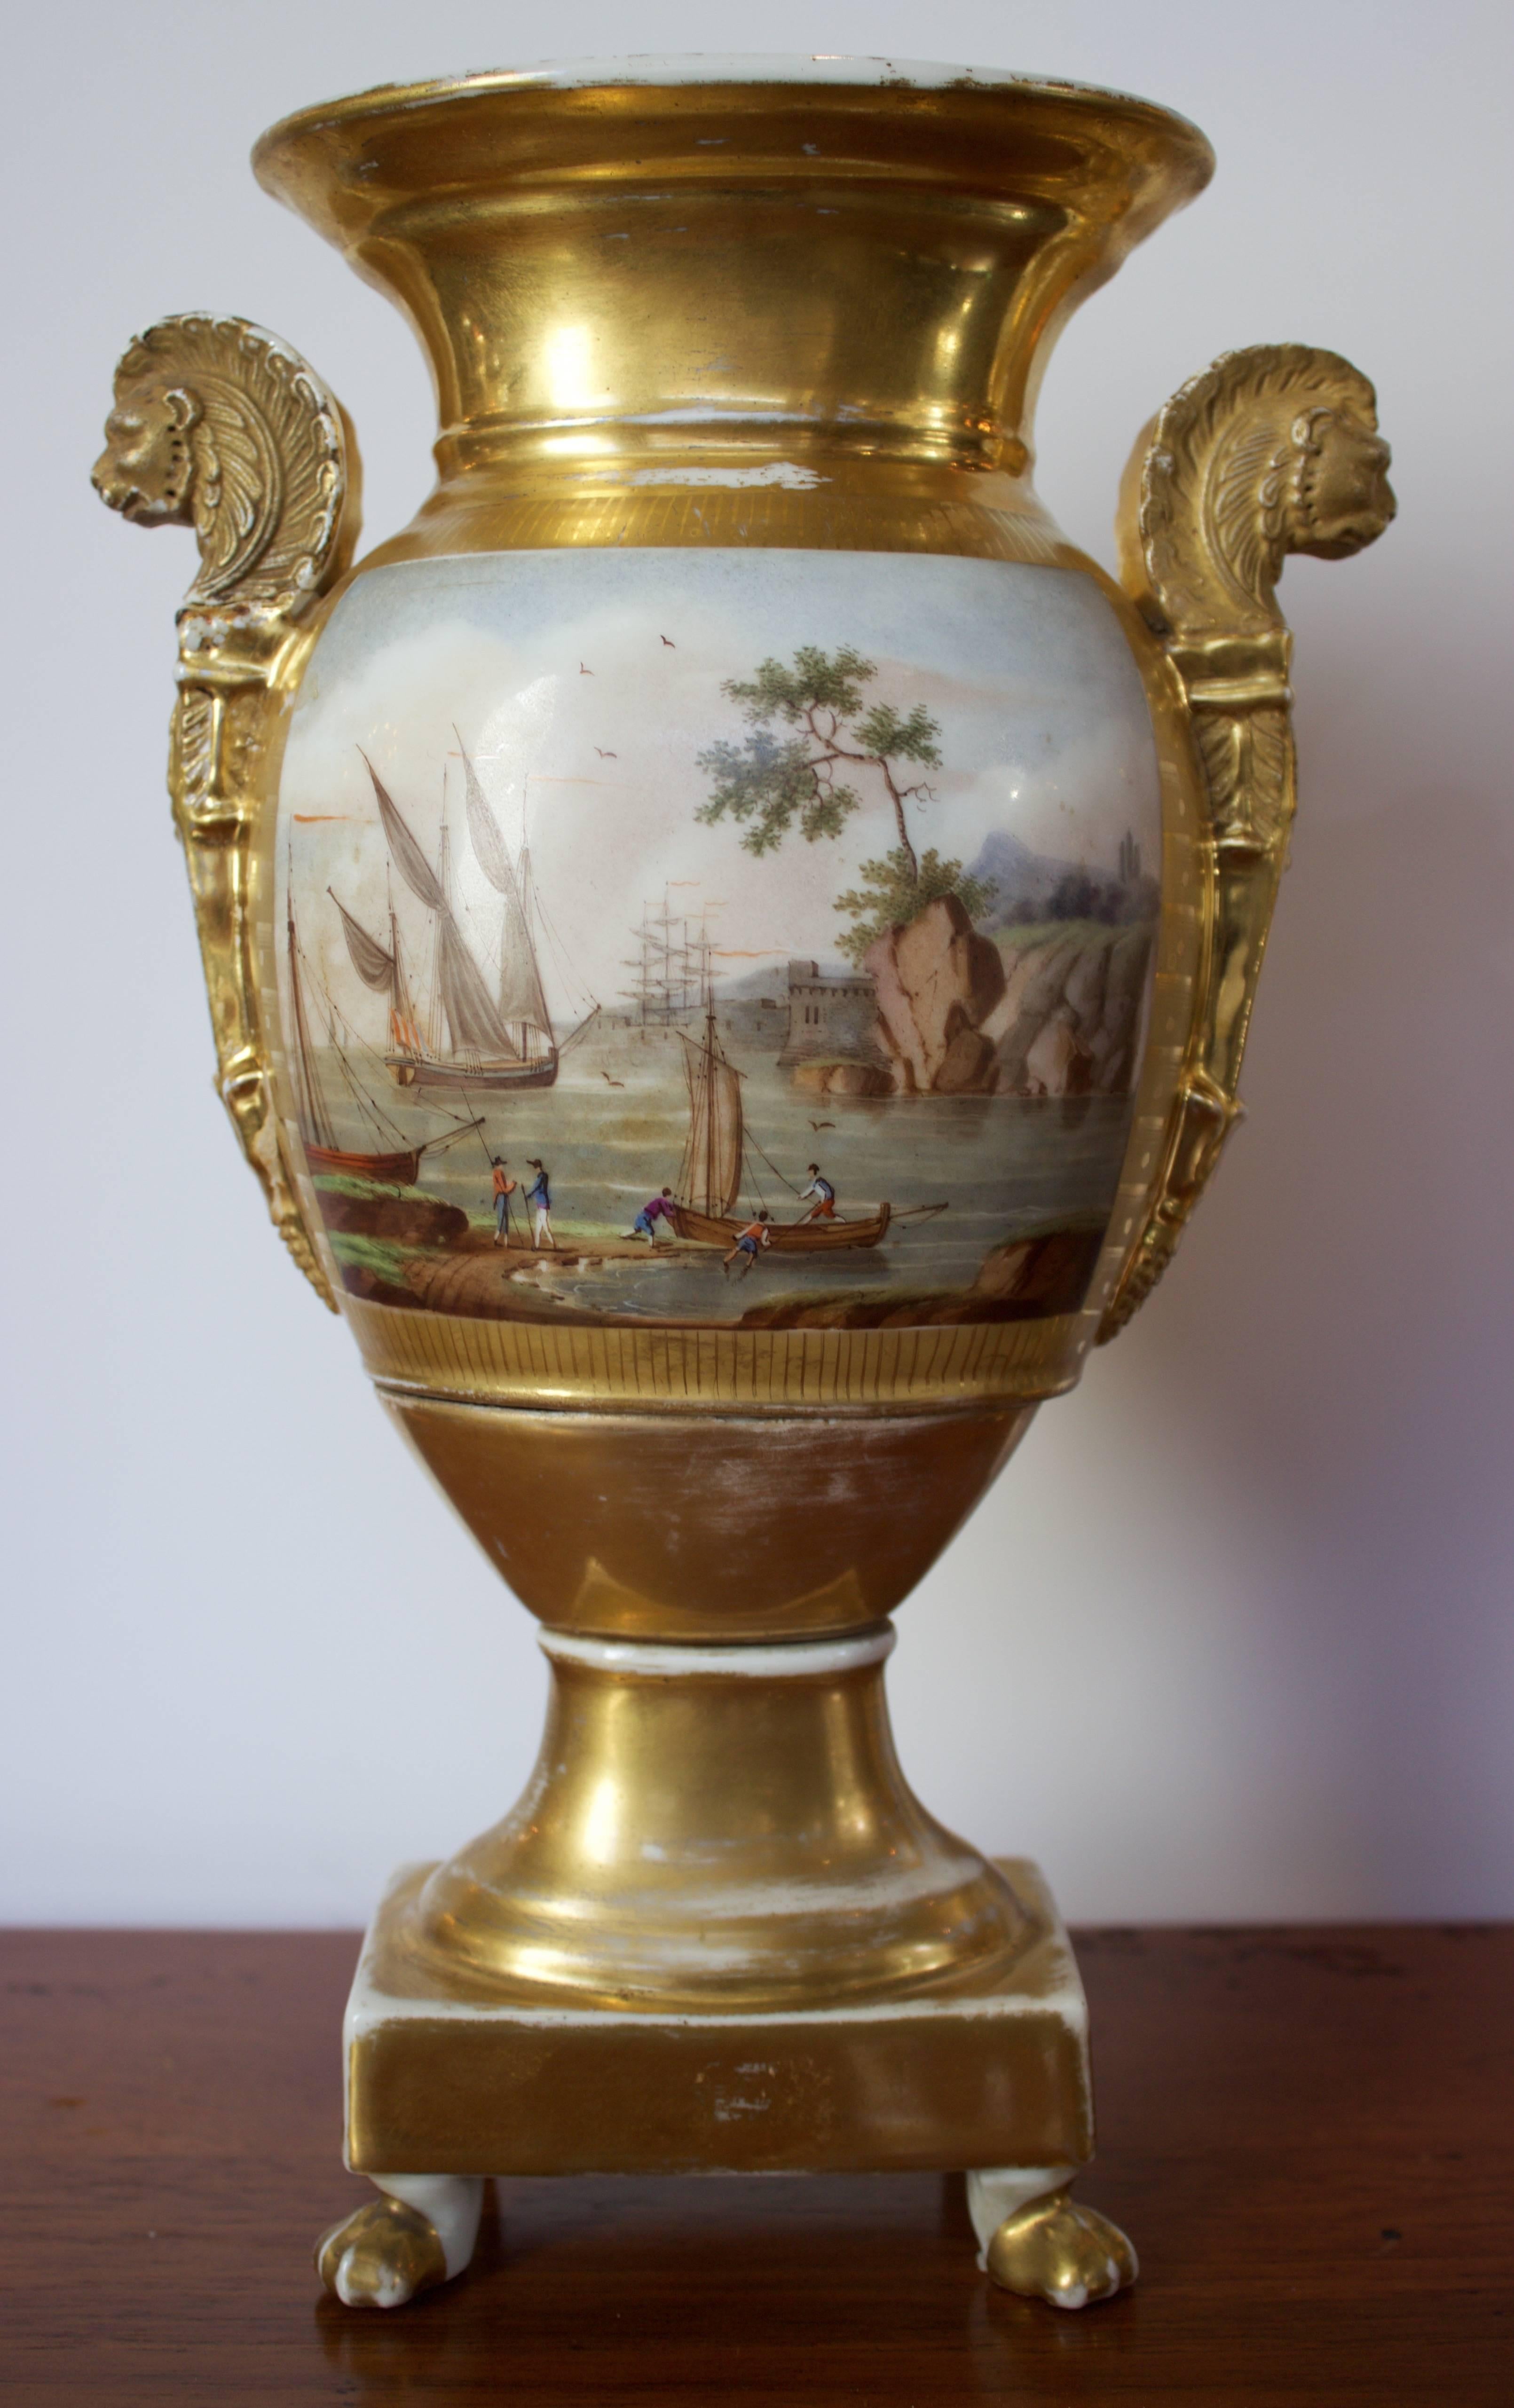 French Pair of Empire Period Porcelain Vases with Maritime Scene